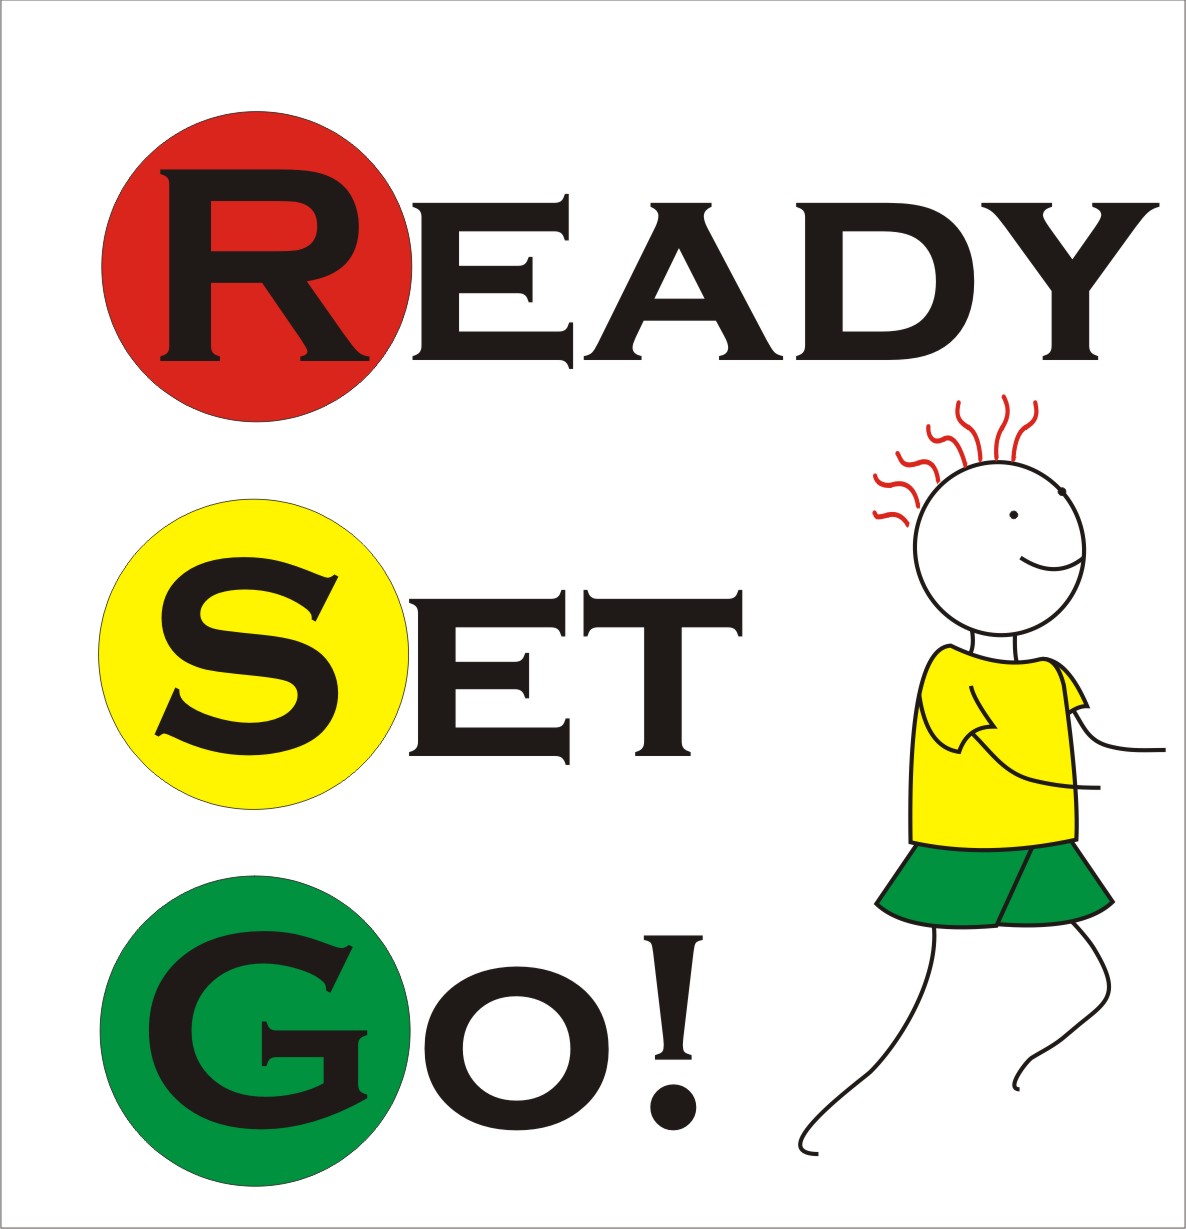 clip art are you ready - photo #24